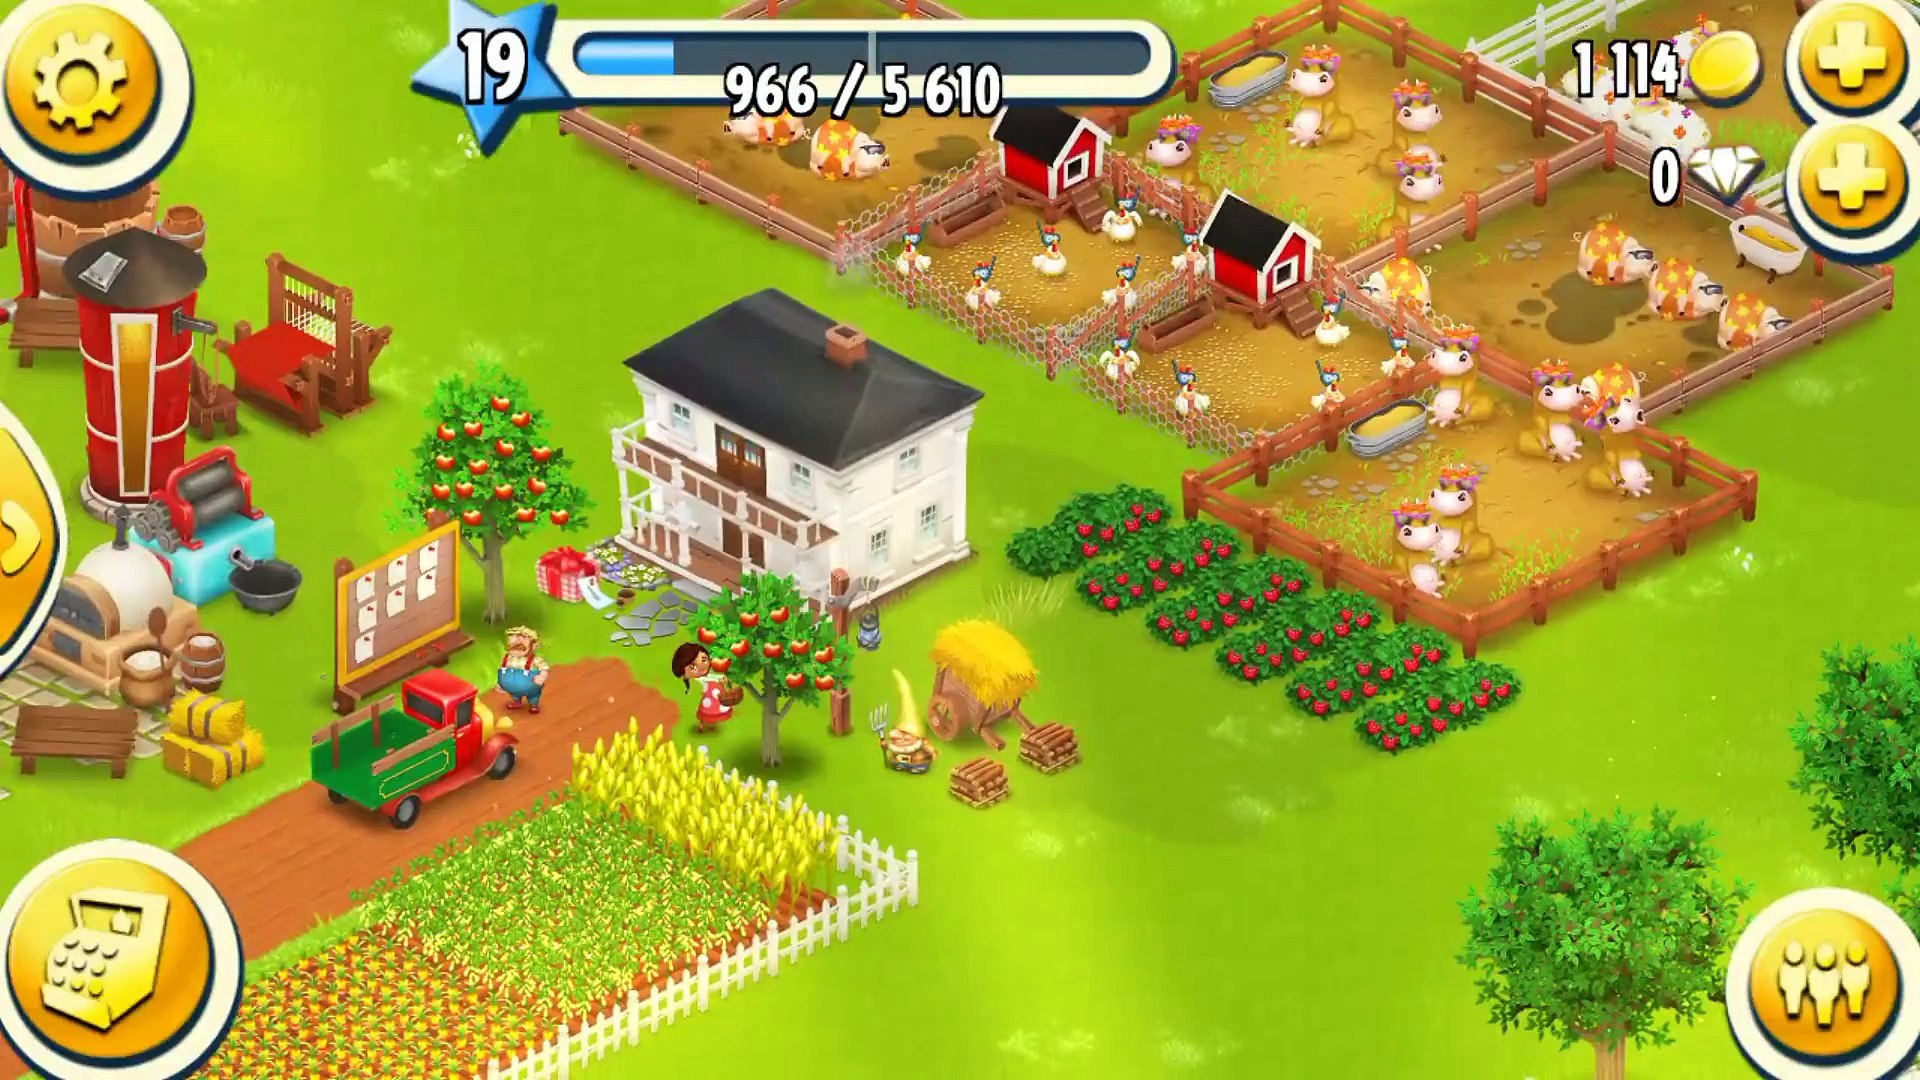 can anyone tell me why my hay day game will not stay connected on my lg tablet please